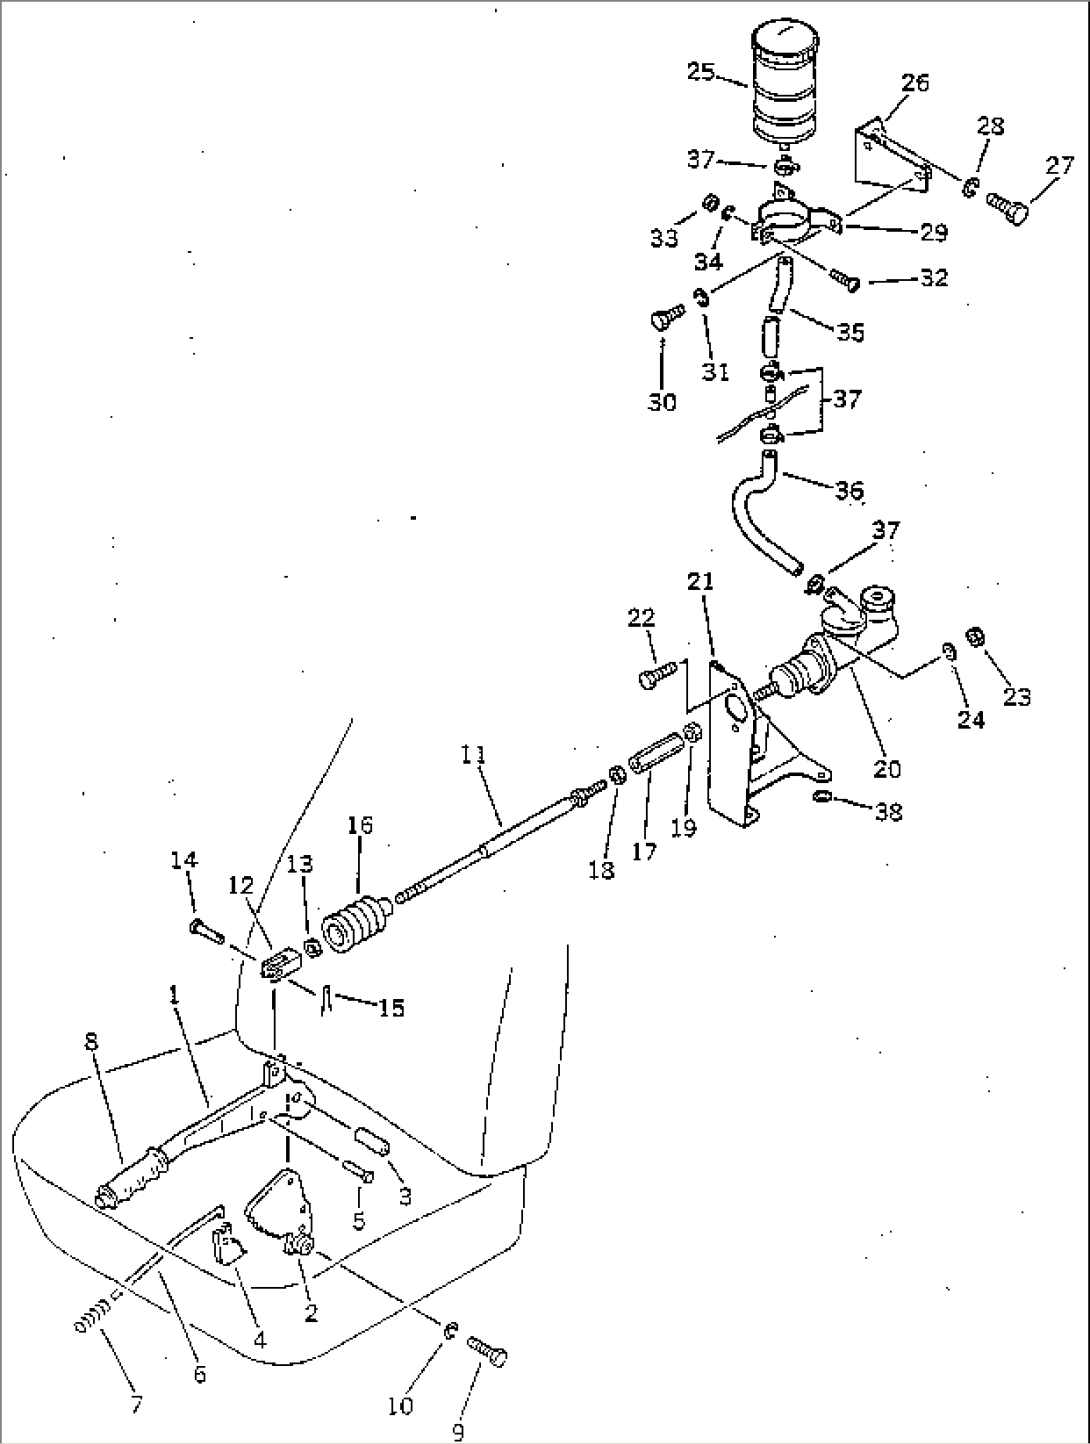 SWING BRAKE LEVER AND PIPING (1/2)